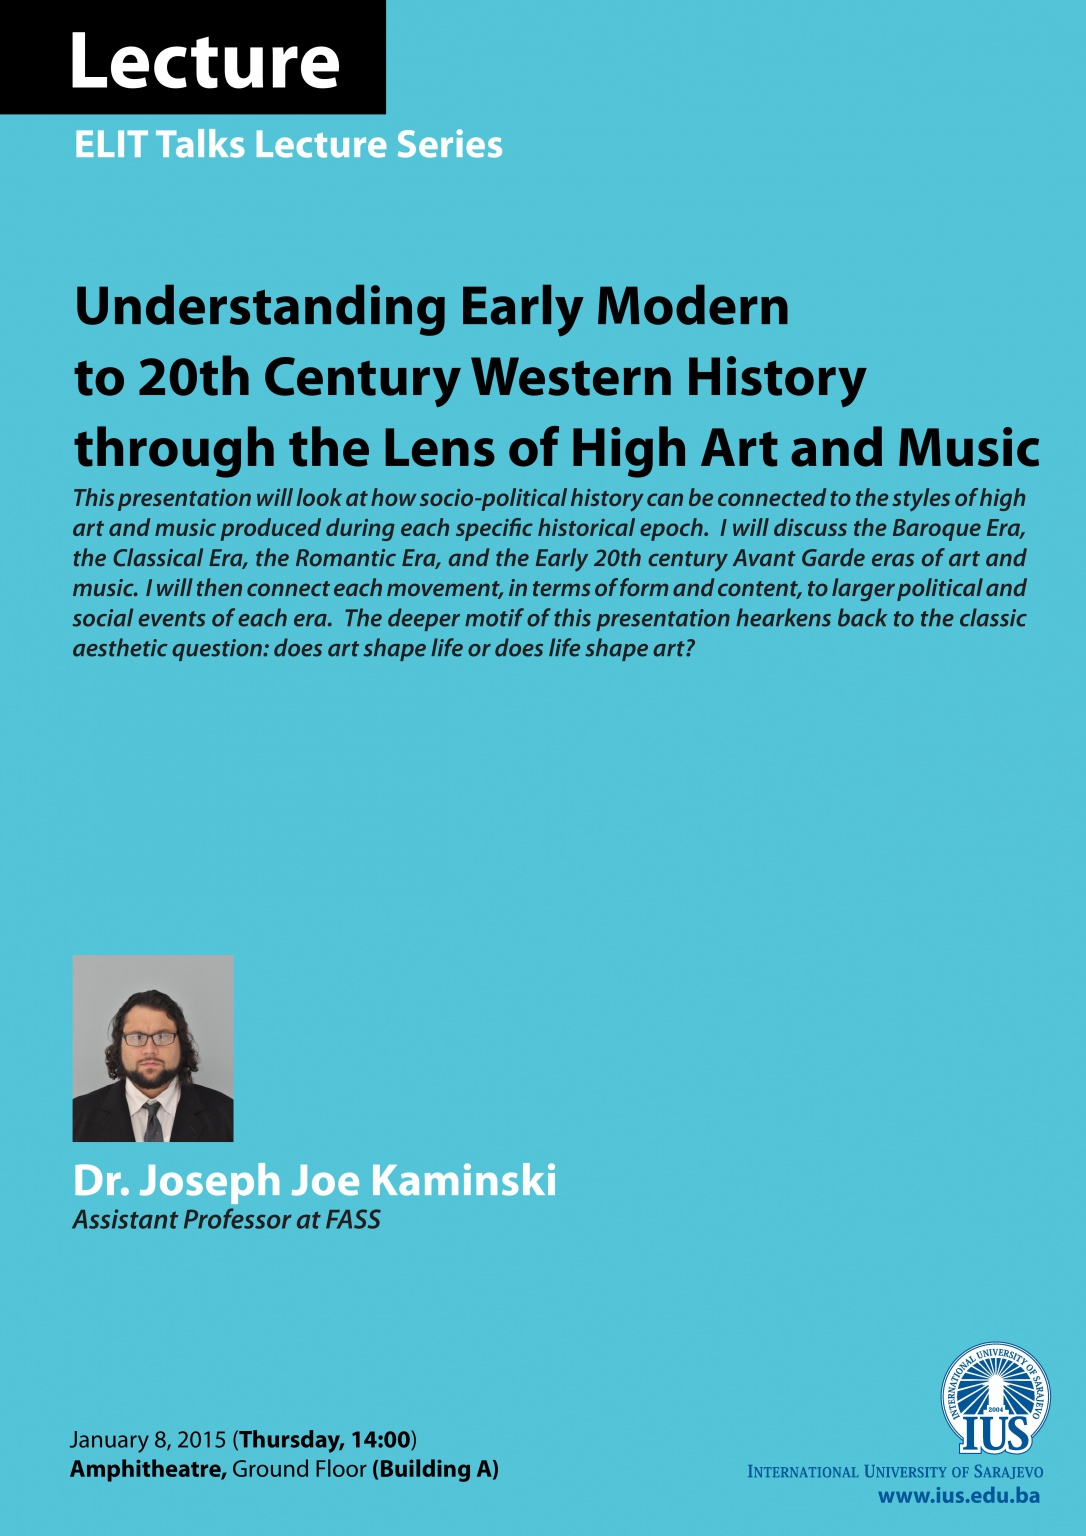  Understanding Early Modern to 20th Century Western History through the Lens of High Art and Music 